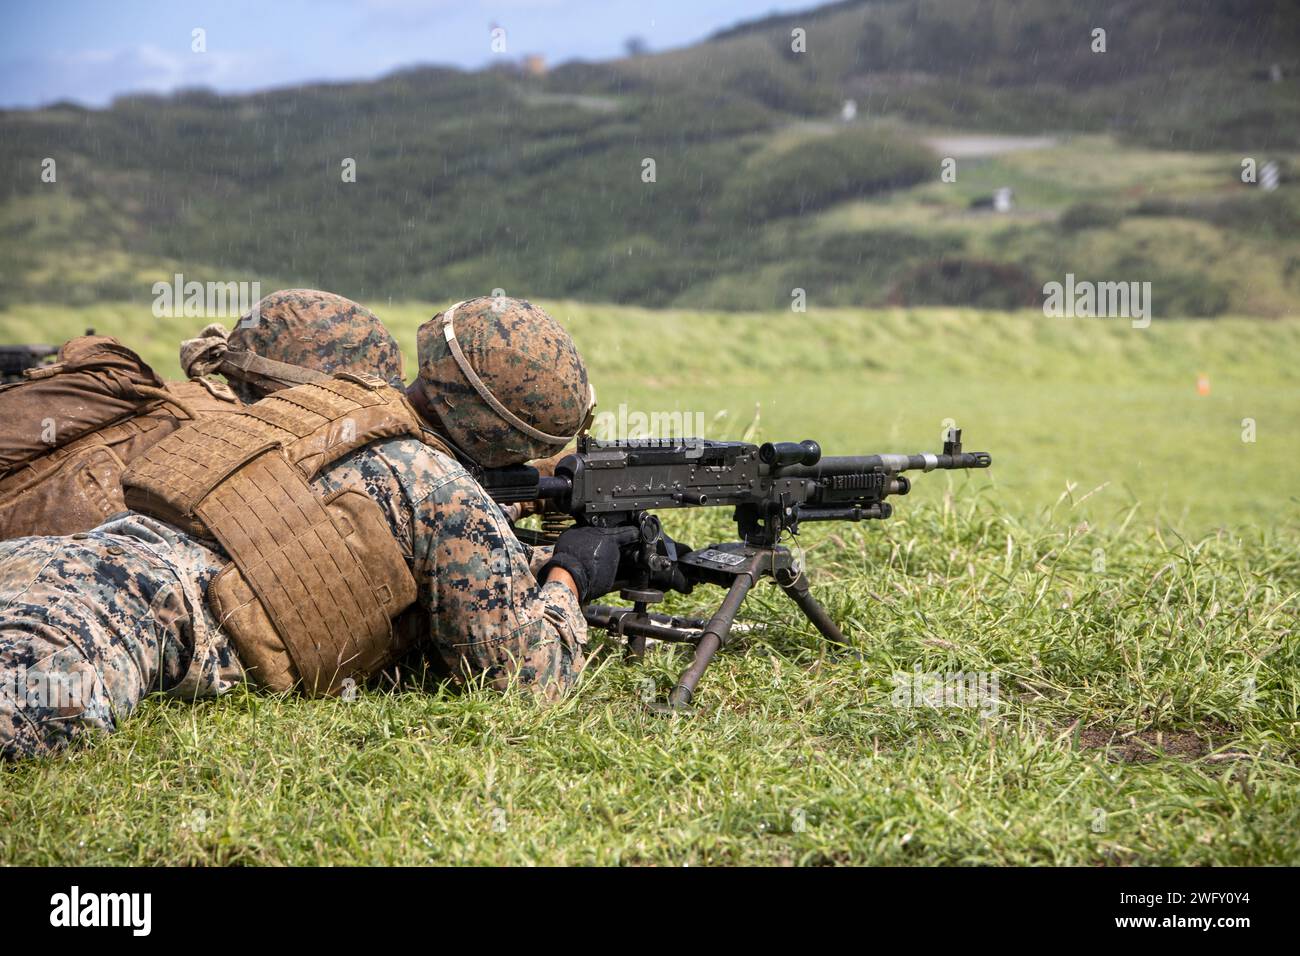 U.S. Marines with Marine Wing Support Squadron (MWSS) 174, Marine Aircraft Group 24, 1st Marine Aircraft Wing, prepare to fire M240-B and M2 .50-caliber machine guns at the Marine Corps Air Station Kaneohe Bay range, Hawaii, Jan. 16, 2024. The training provided an opportunity for Marines with MWSS-174 to get hands-on training and familiarization with the employment of crew-served weapons. Stock Photo